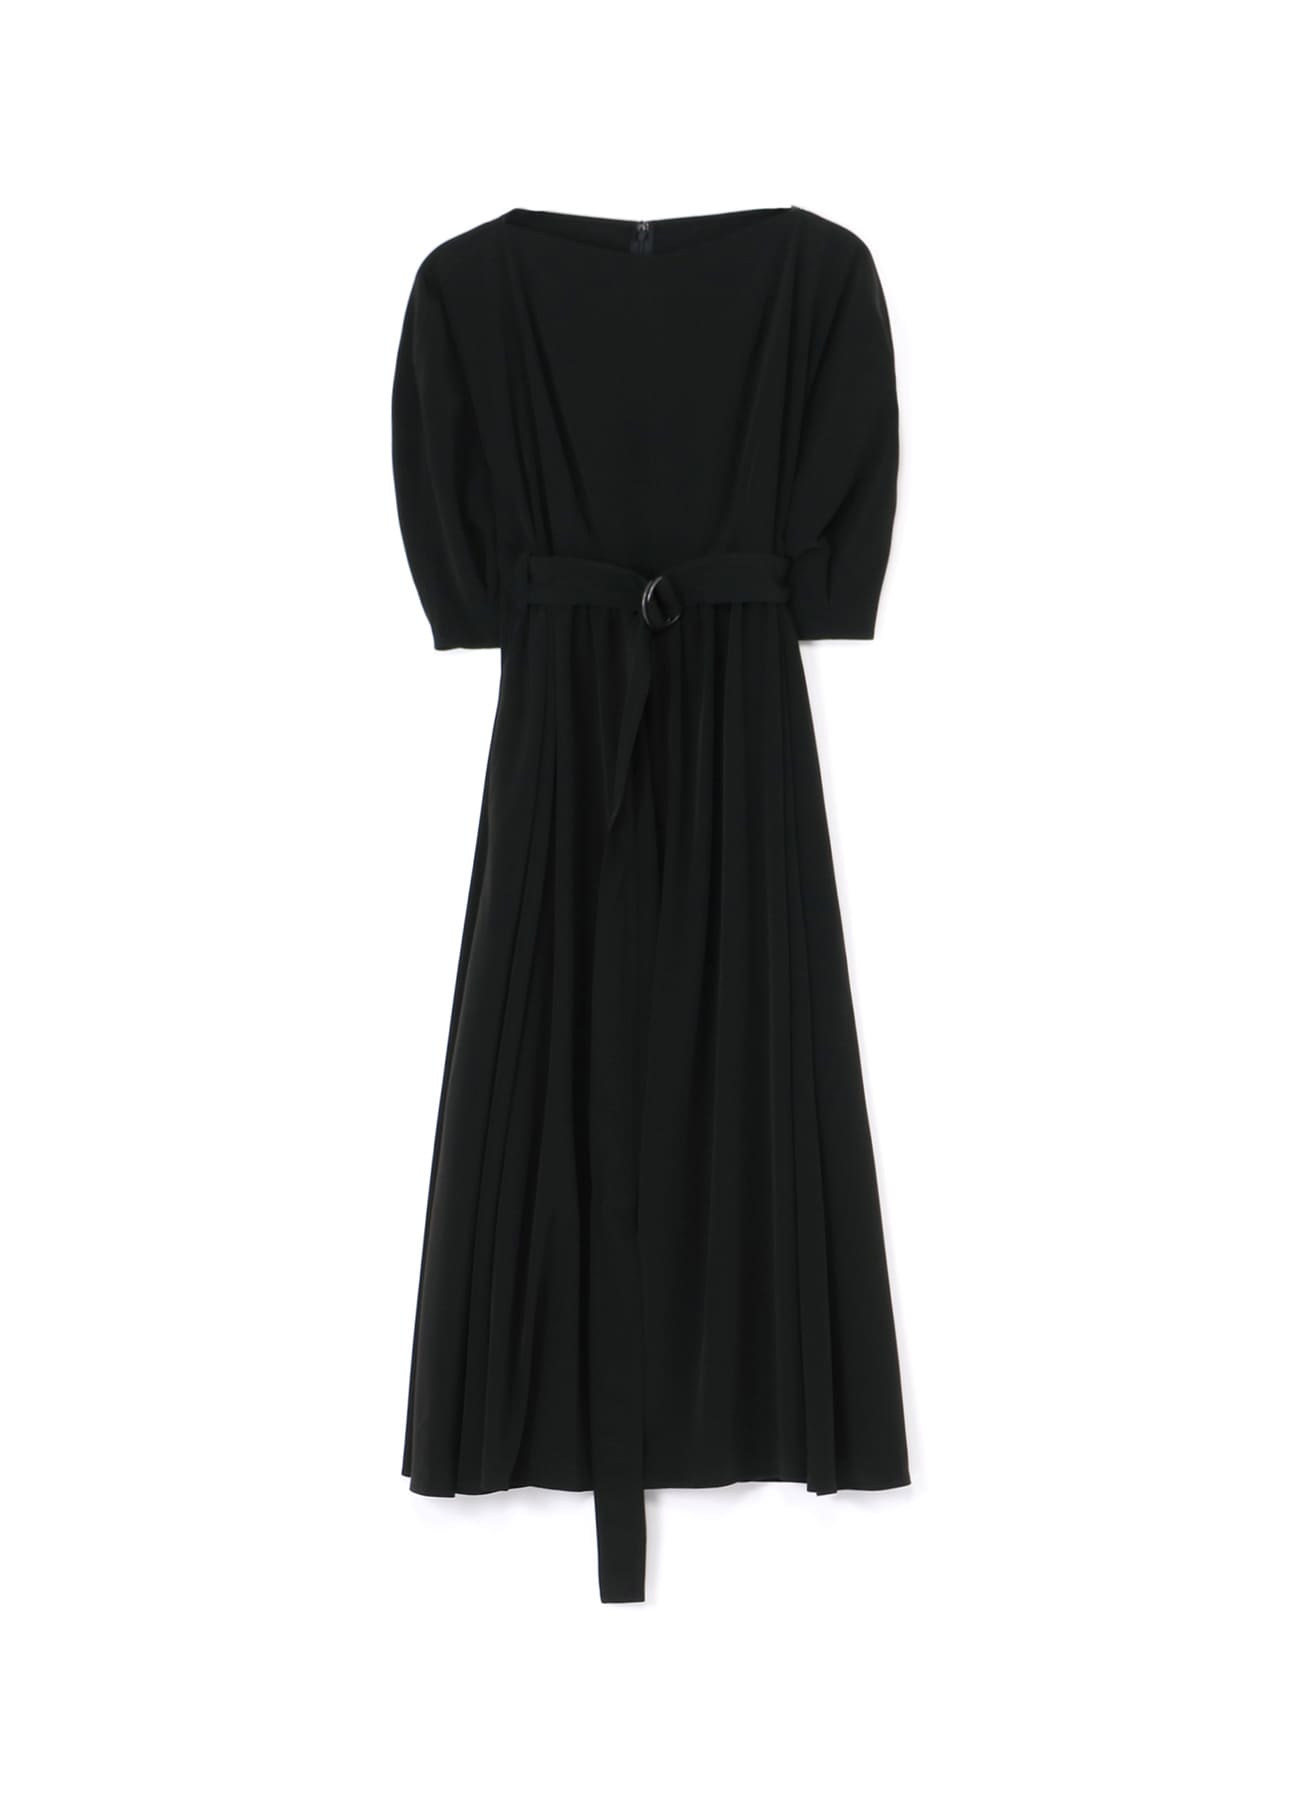 TRIACETATE/POLYESTER BELTED DRESS